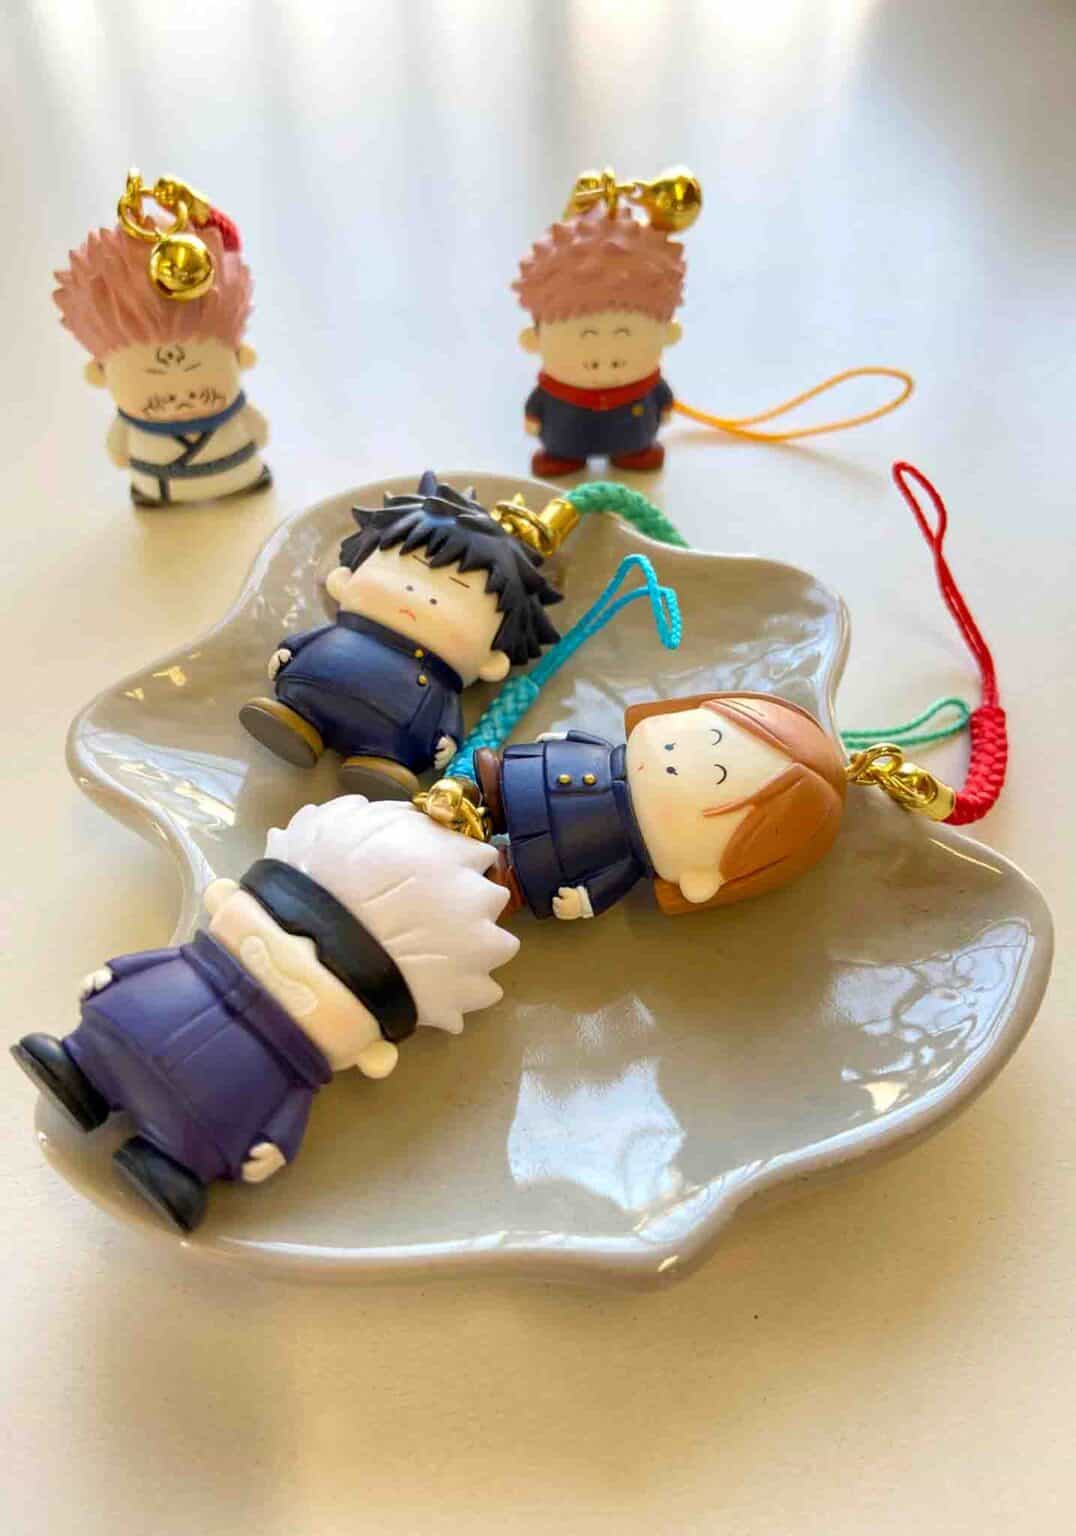 Clever Idiots Jujutsu Kaisen Movie 0 Vinyl Figure Charm with Bell Surprise Box Kawaii Gifts 4580045305774